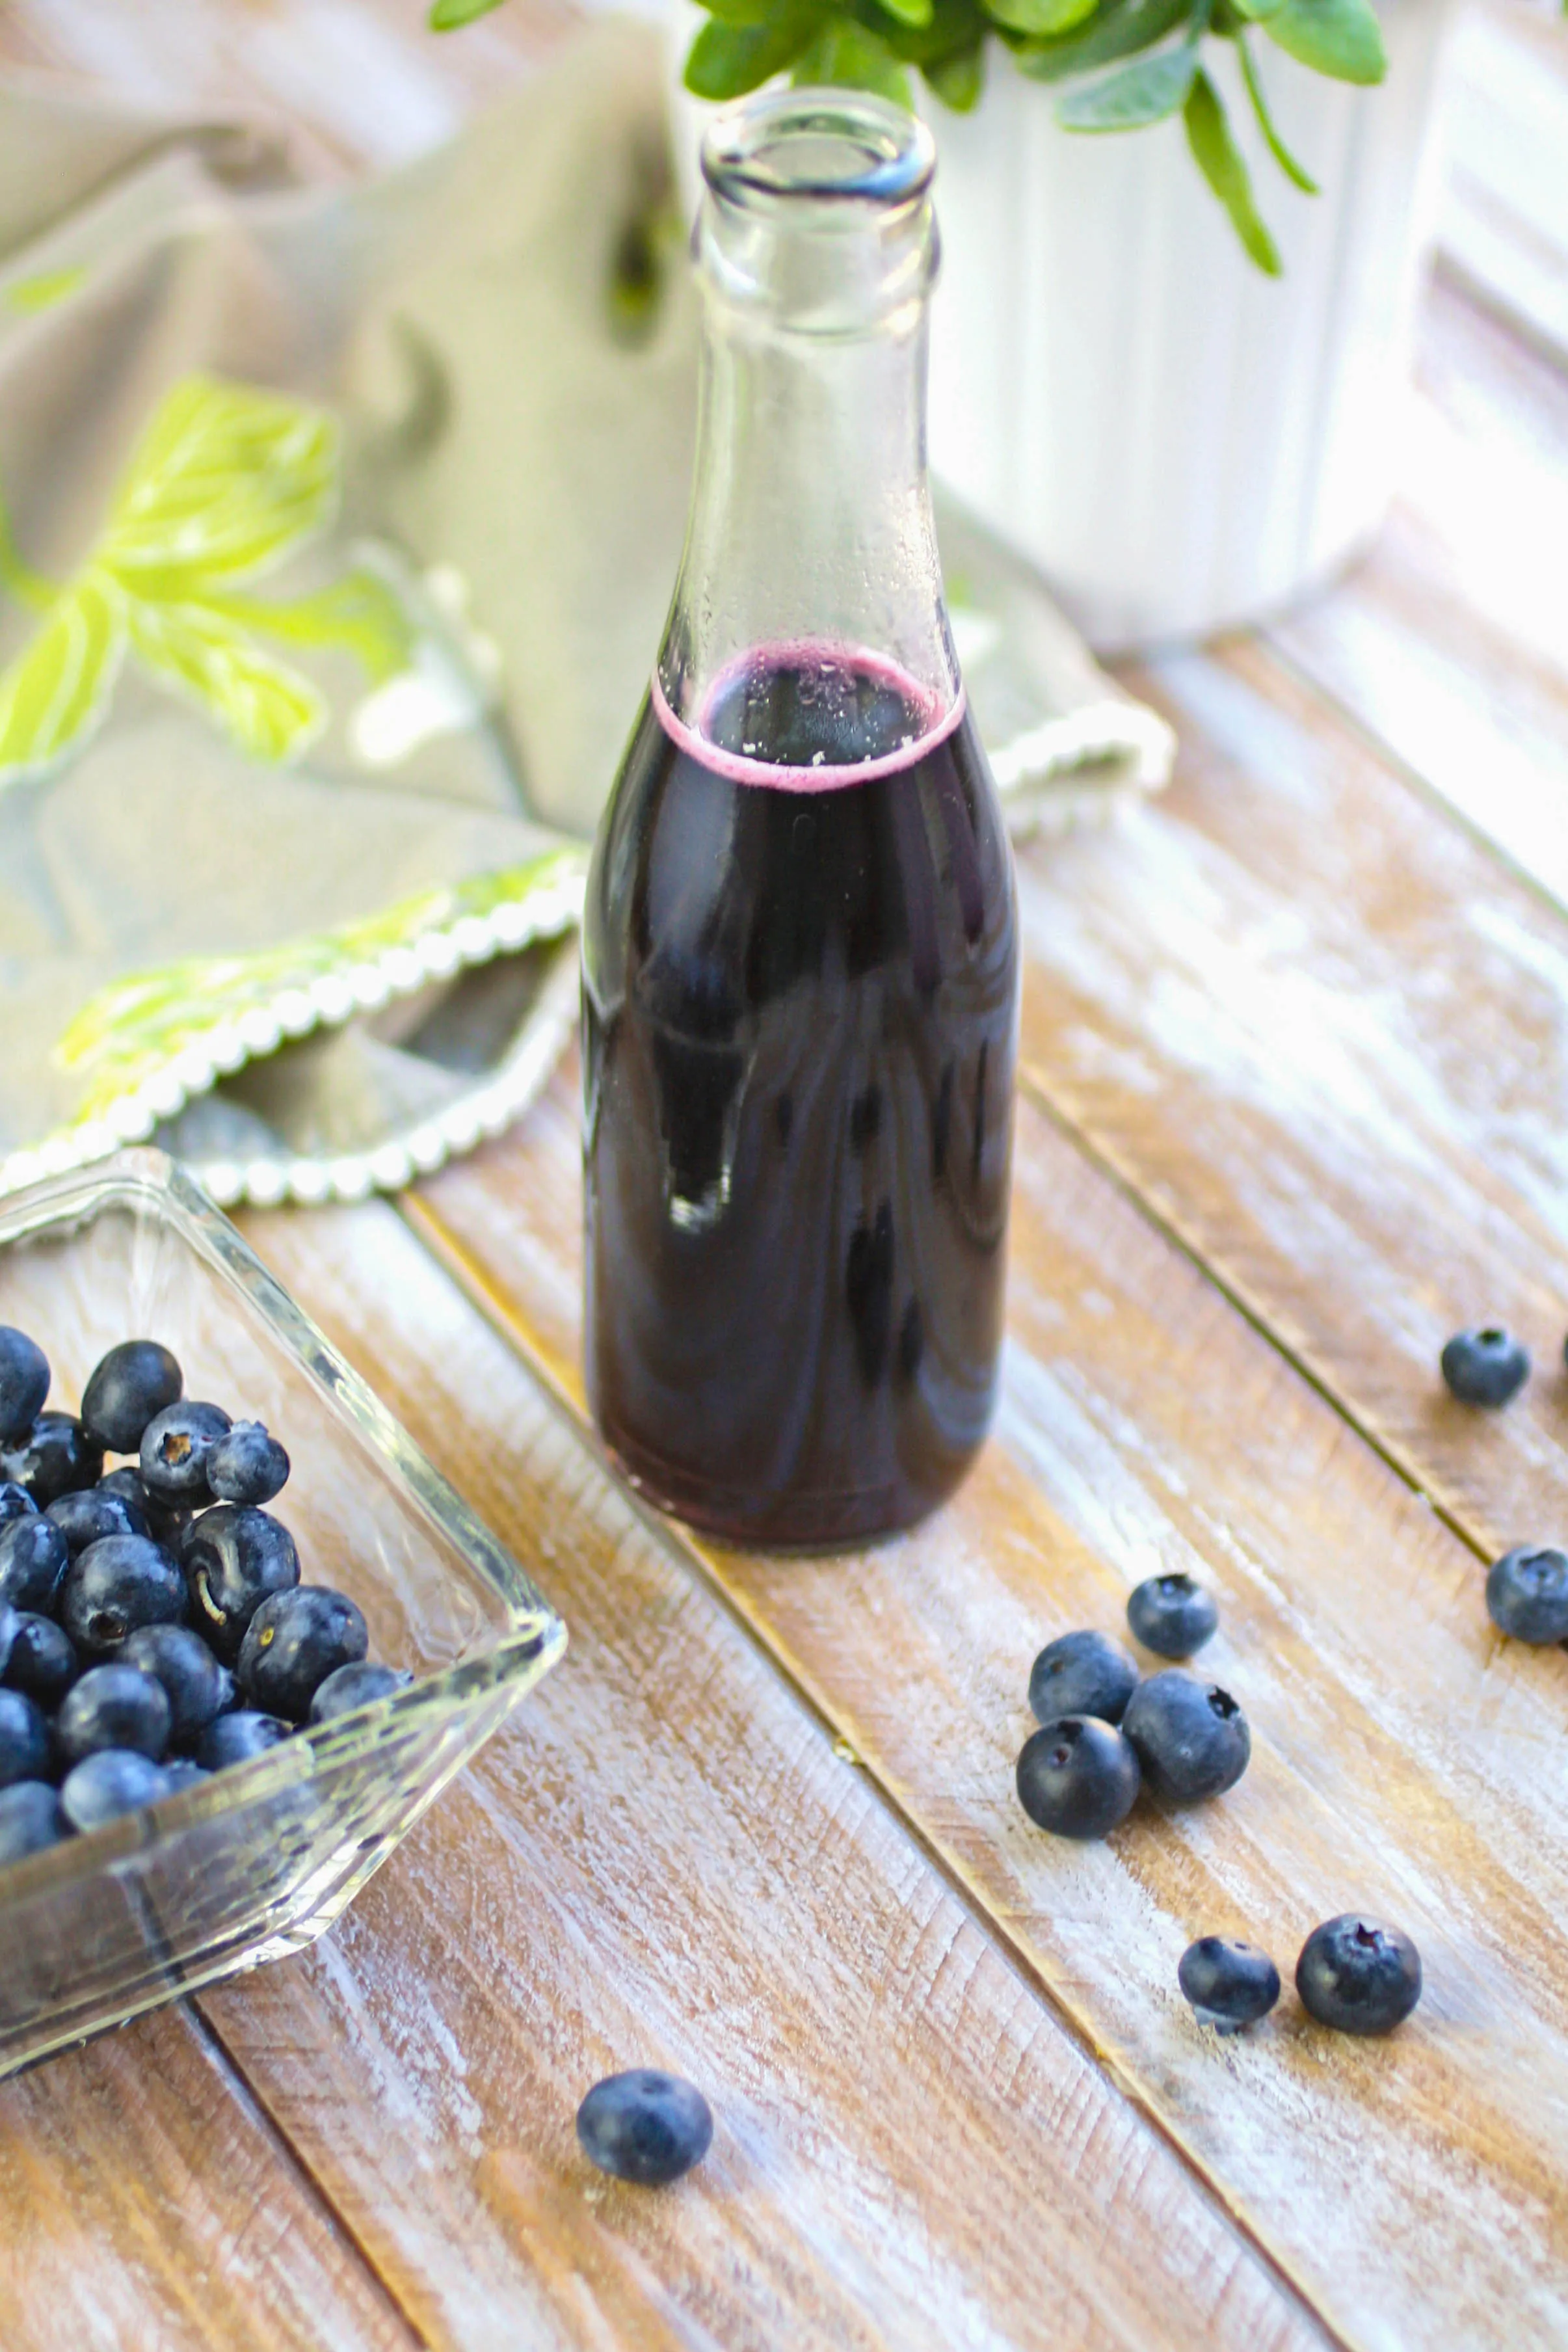 Blueberry Italian Cream Soda drinks are easy to make with your own blueberry syrup. Blueberry Italian Cream Soda drinks are fruity, pretty, and so tasty!